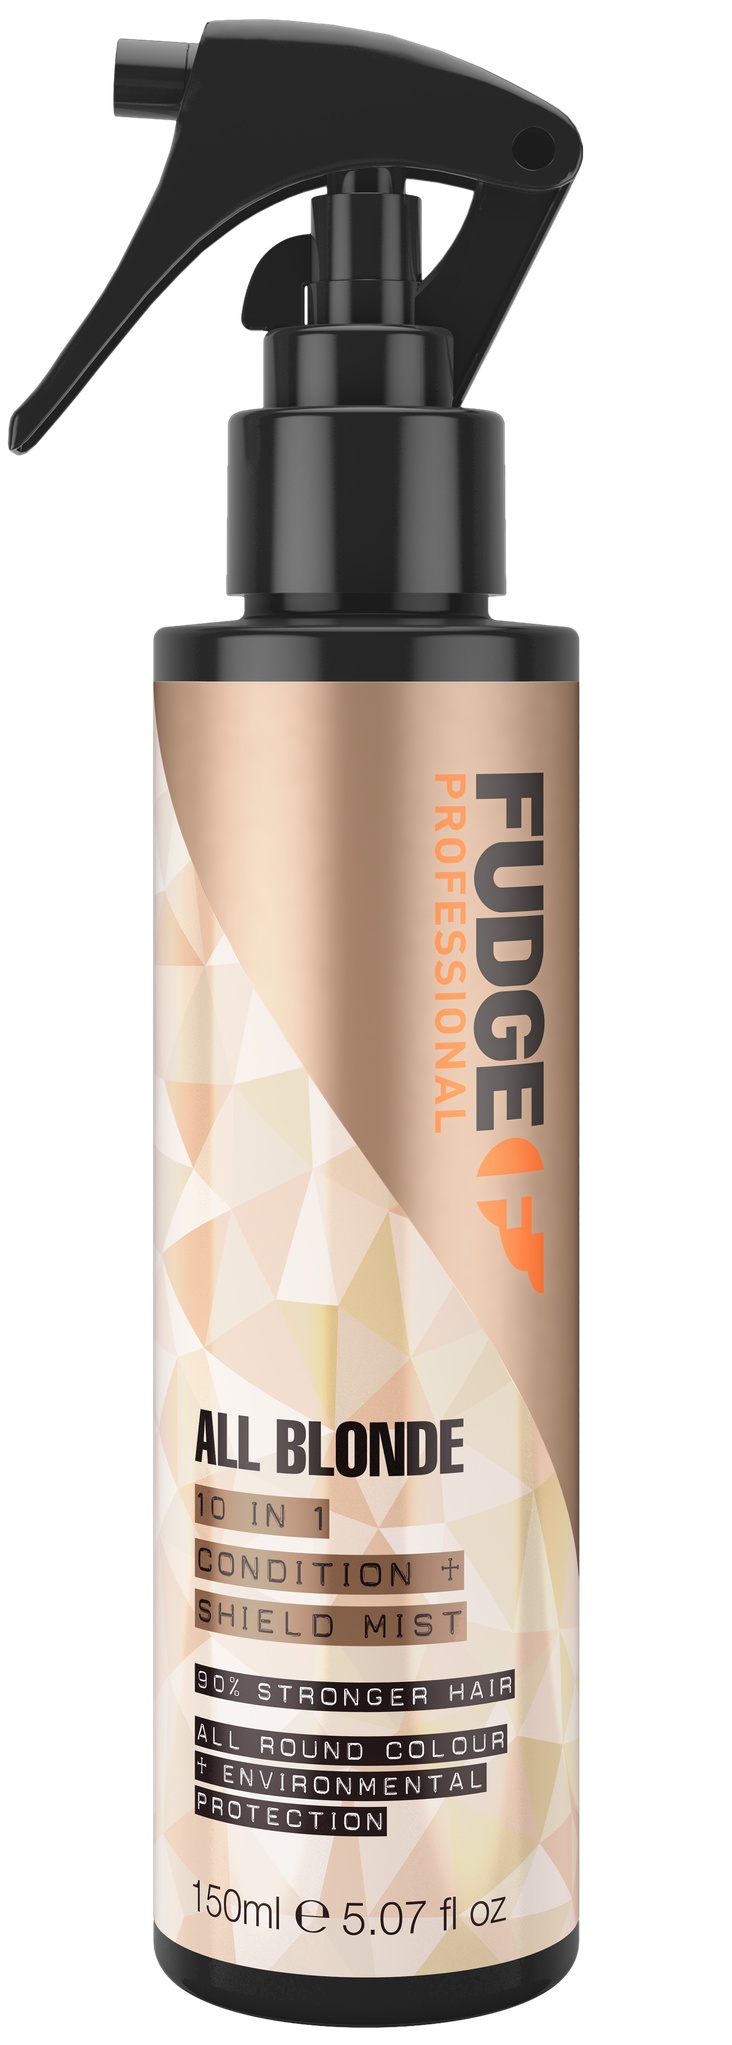 Fudge Professional All Blonde Condition And Shield Mist